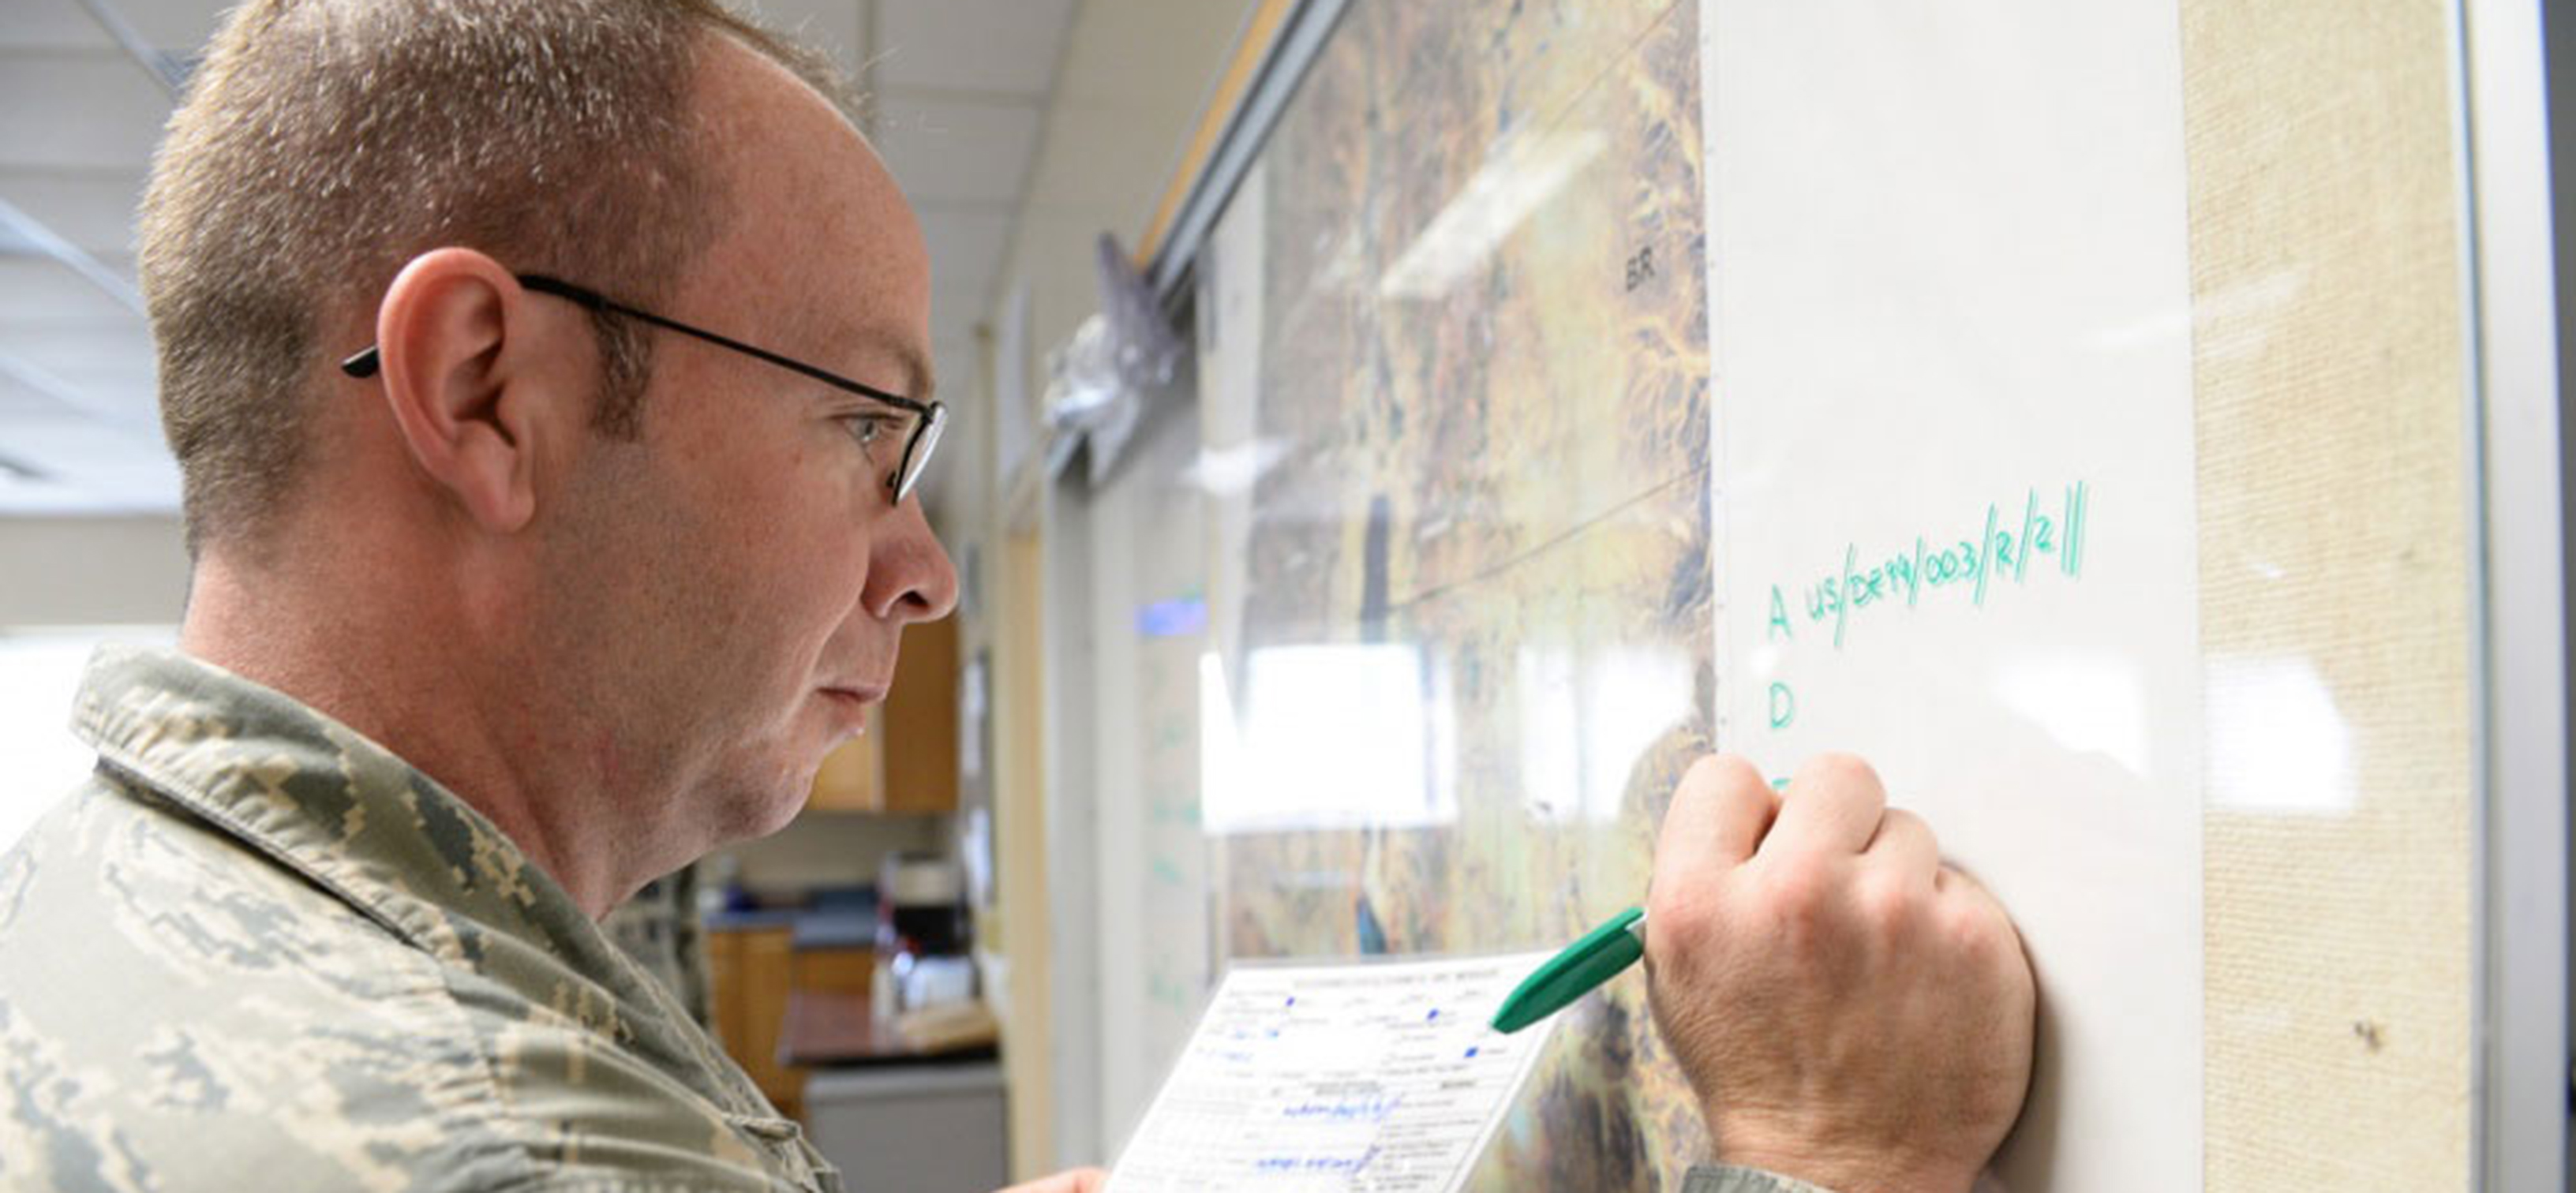 Military student writing on whiteboard